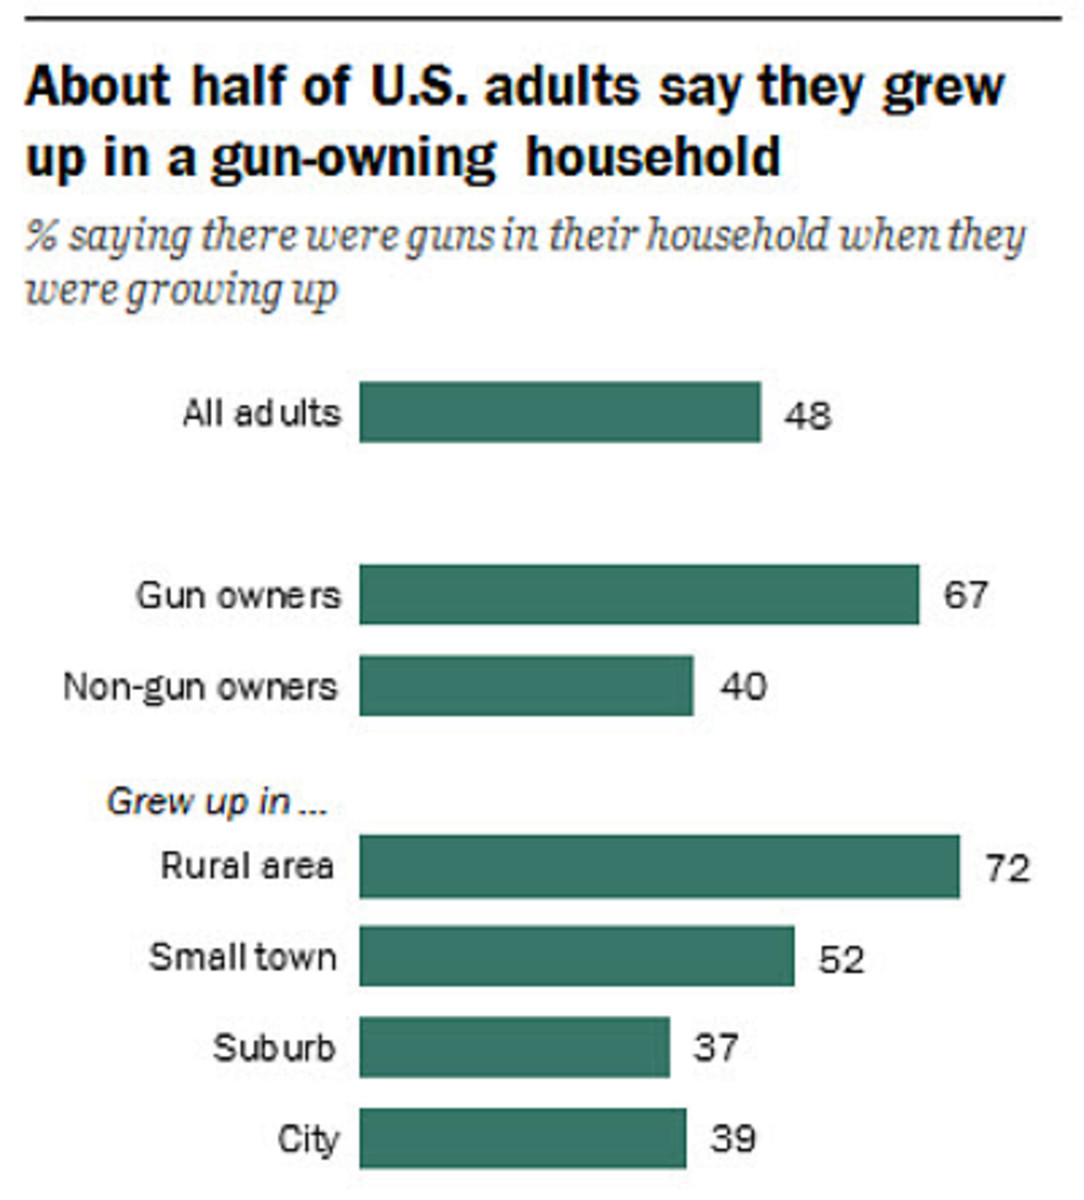 U.S. adults in a household with a gun